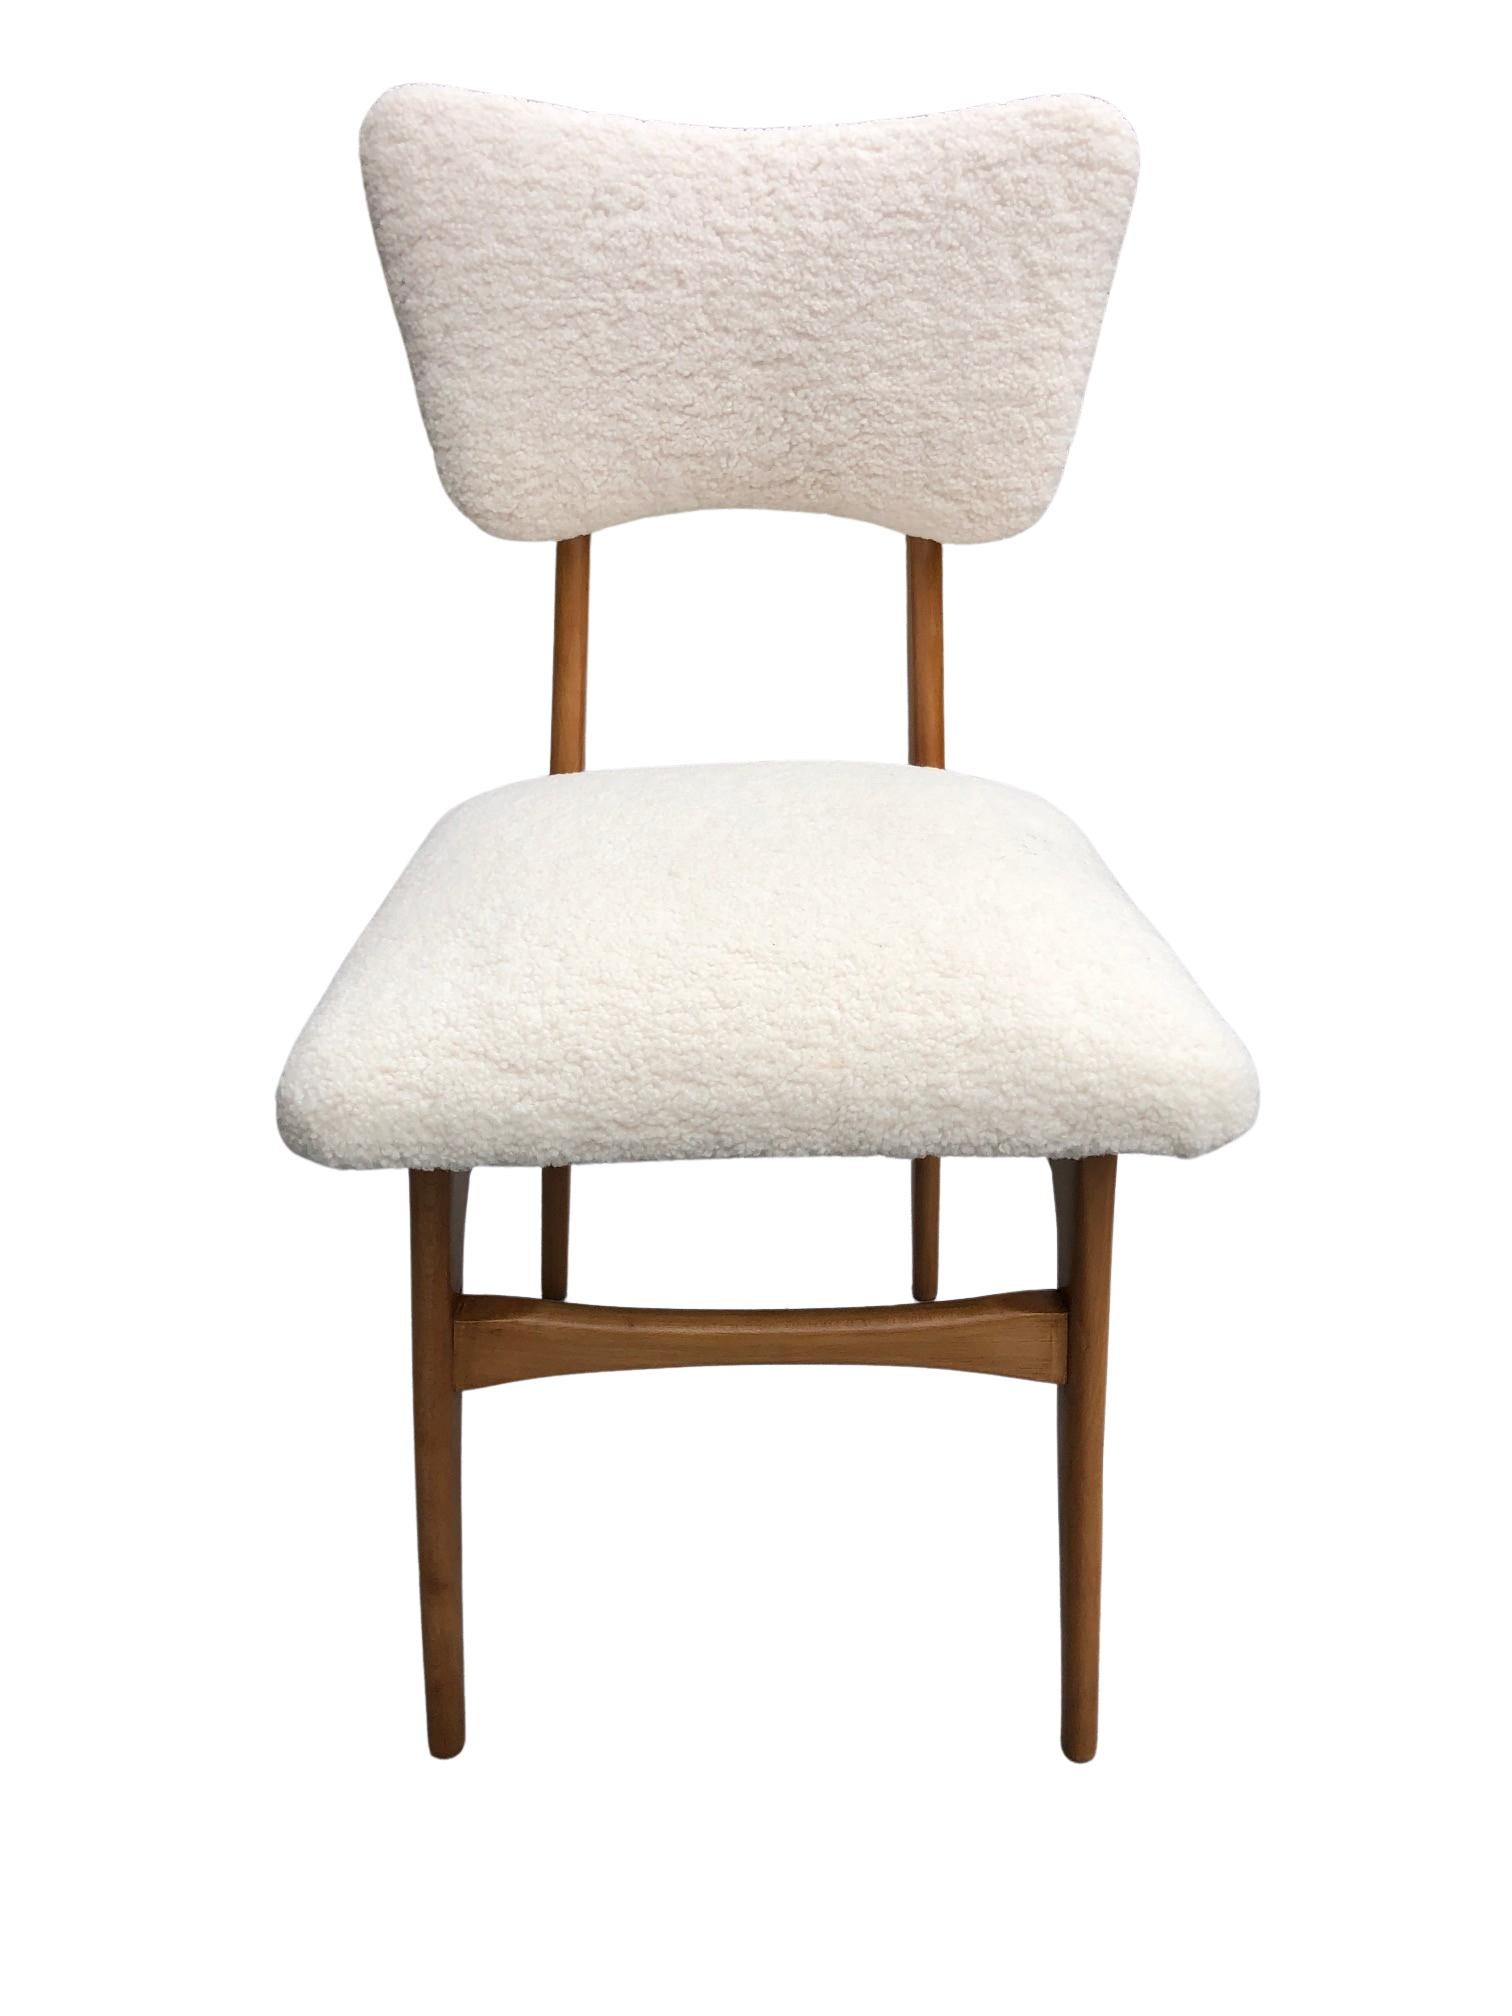 Unique chair manufactured in Poland in the 1960s, designed by Rajmund Halas. 

The upholstery is made of pleasant to touch boucle textile. It is high quality and durable italian fabric in a light beige color. The chair structure is made of beech